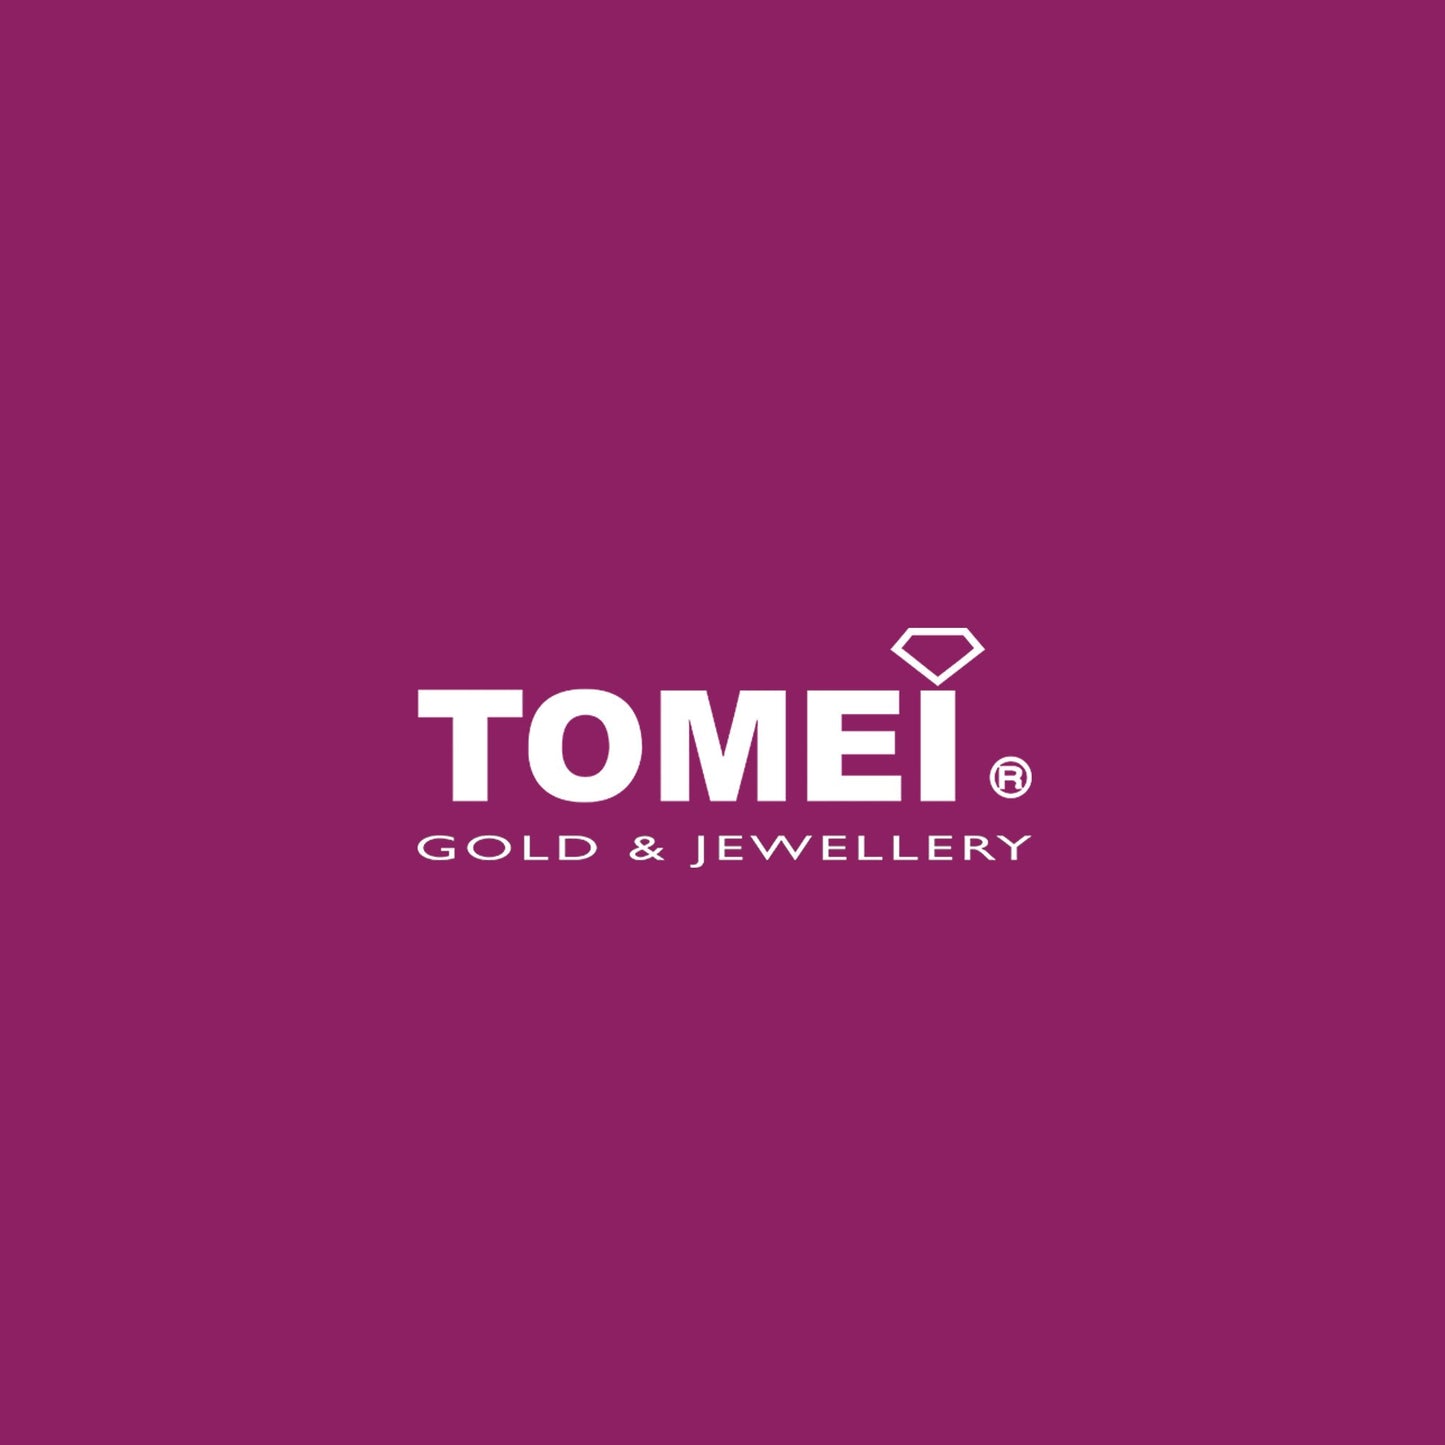 TOMEI Double Strands Laser Balls Necklace, Yellow Gold 916